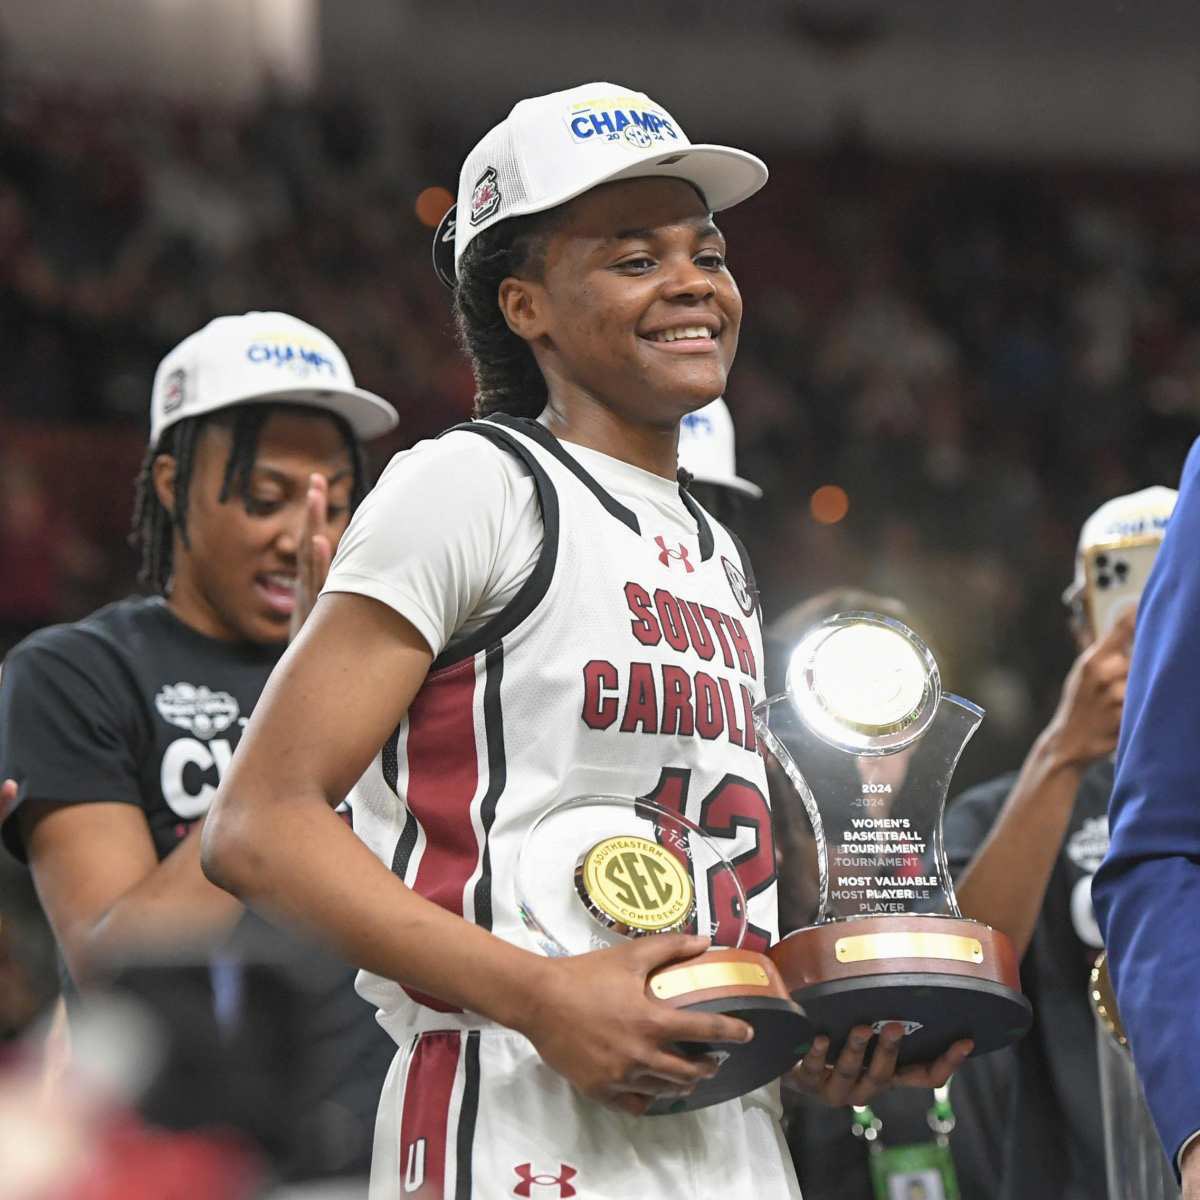 Stephen Curry's signature line Curry Brand is signing Univ. of South Carolina guard MiLaysia Fulwiley to a multiyear NIL deal, making her the first college athlete to partner directly with the brand. Fulwiley is first ever freshman at South Carolina to be MVP of SEC Tournament.